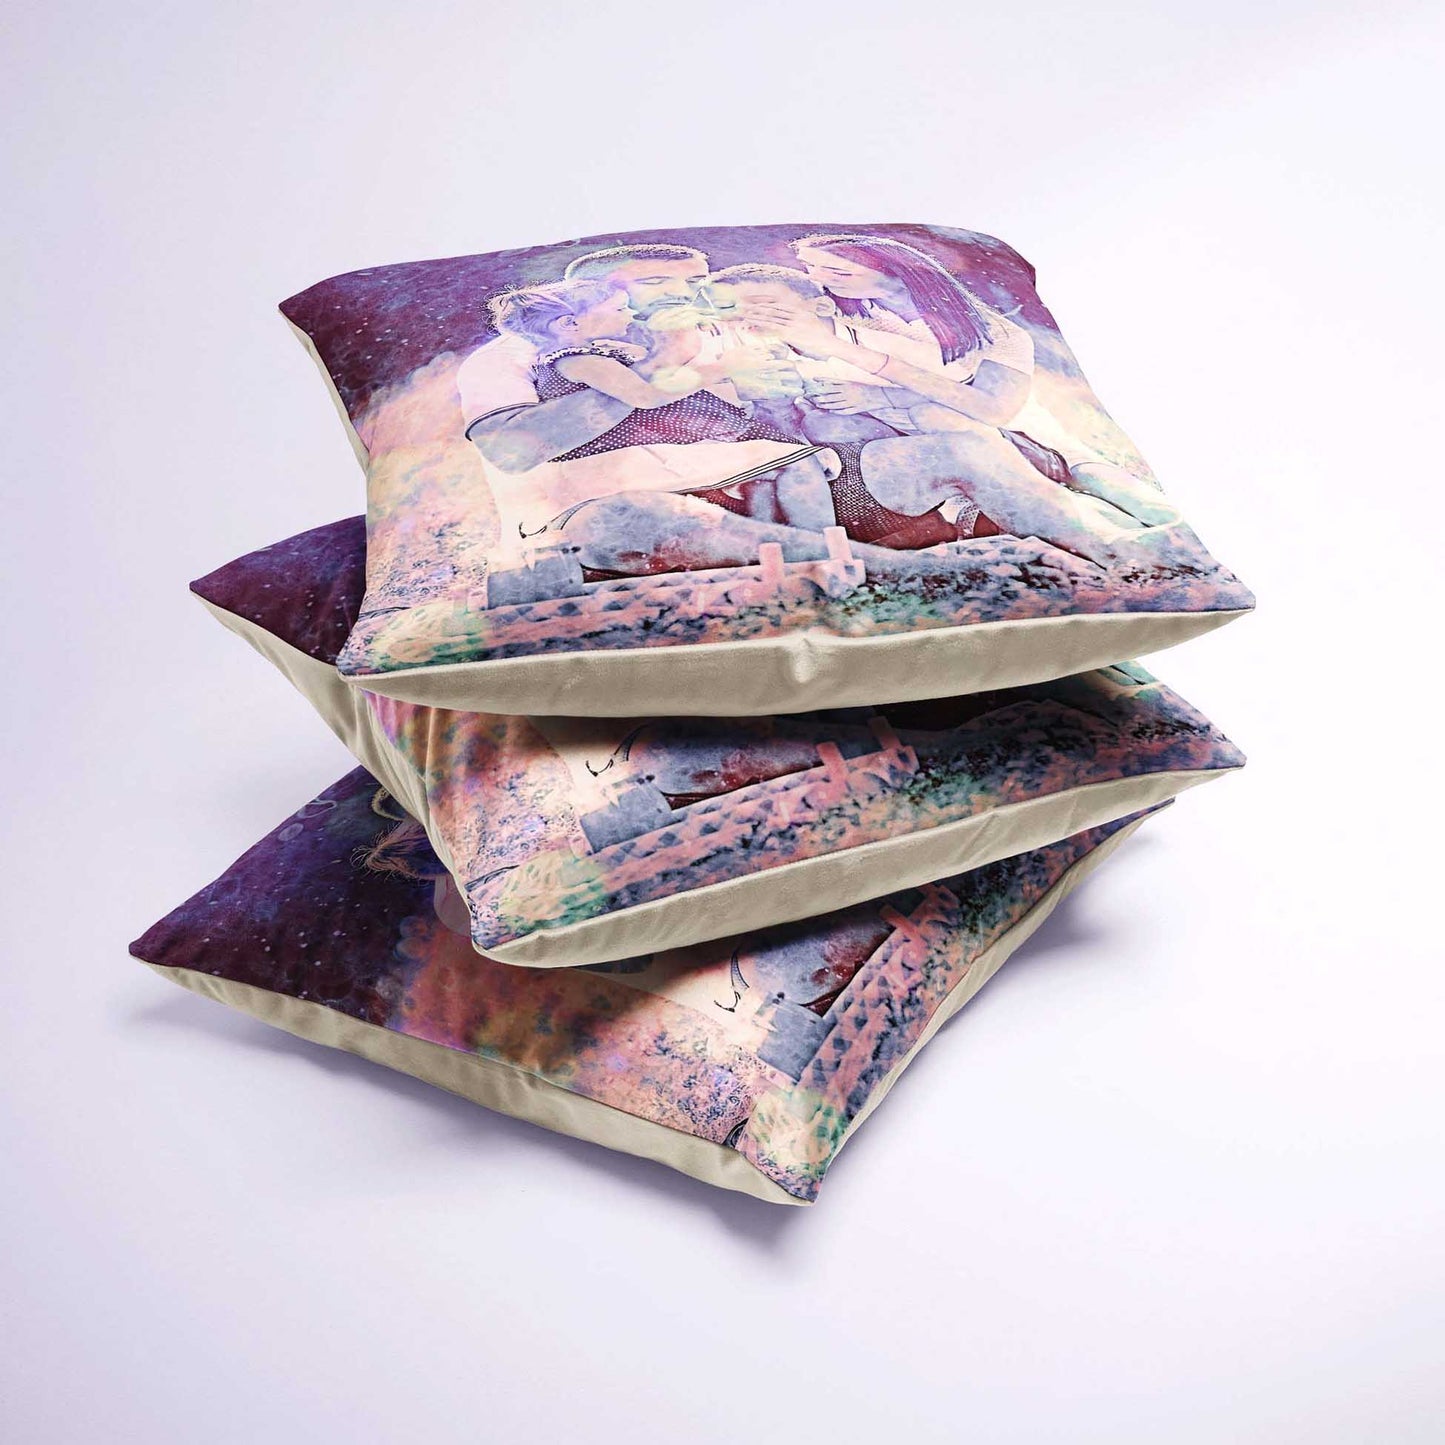 The Personalised Special Purple FX Cushion is a true work of art for your home decor. Custom-made to your specifications, it is a unique and original piece that adds a vibrant and bright element to any space. Printed from your photo